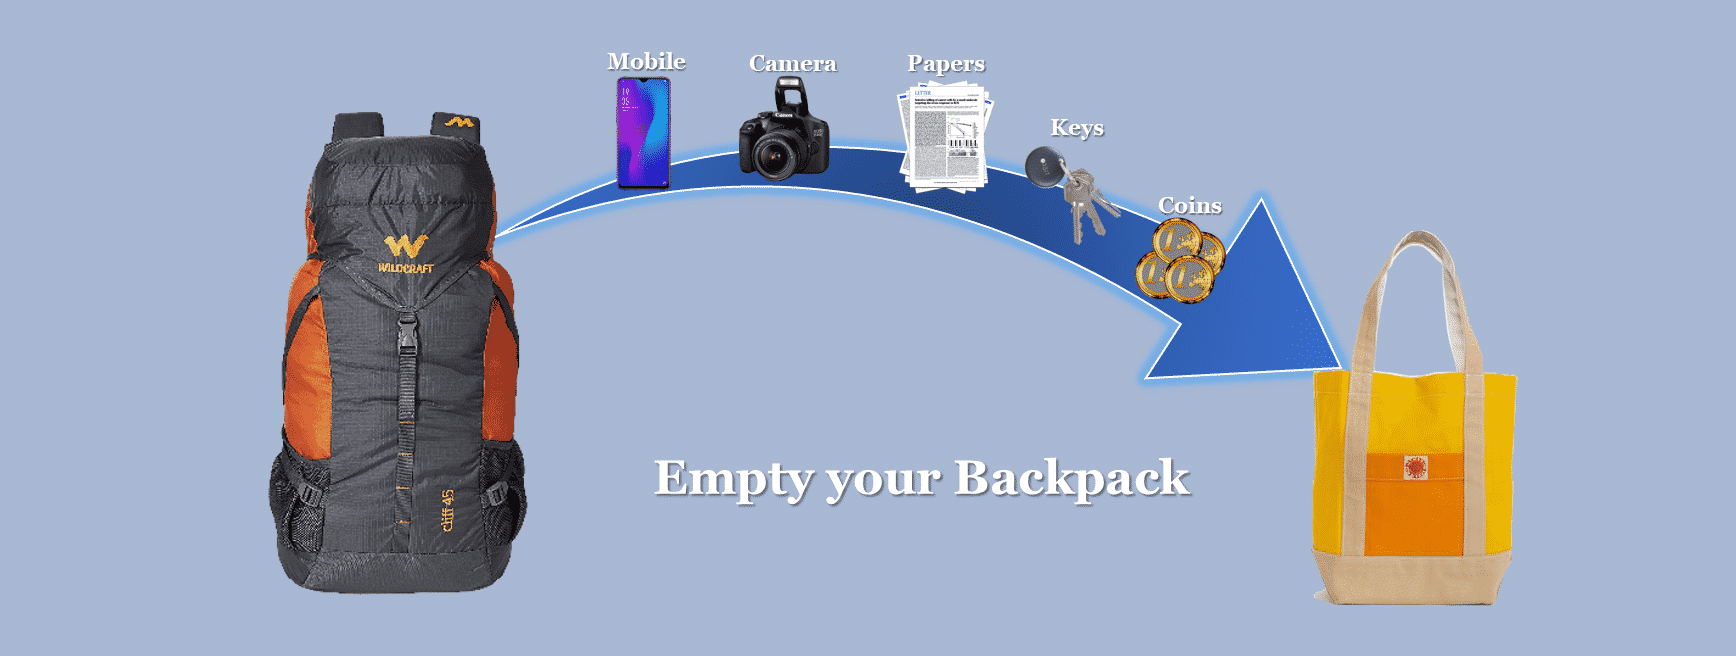 Empty your backpack